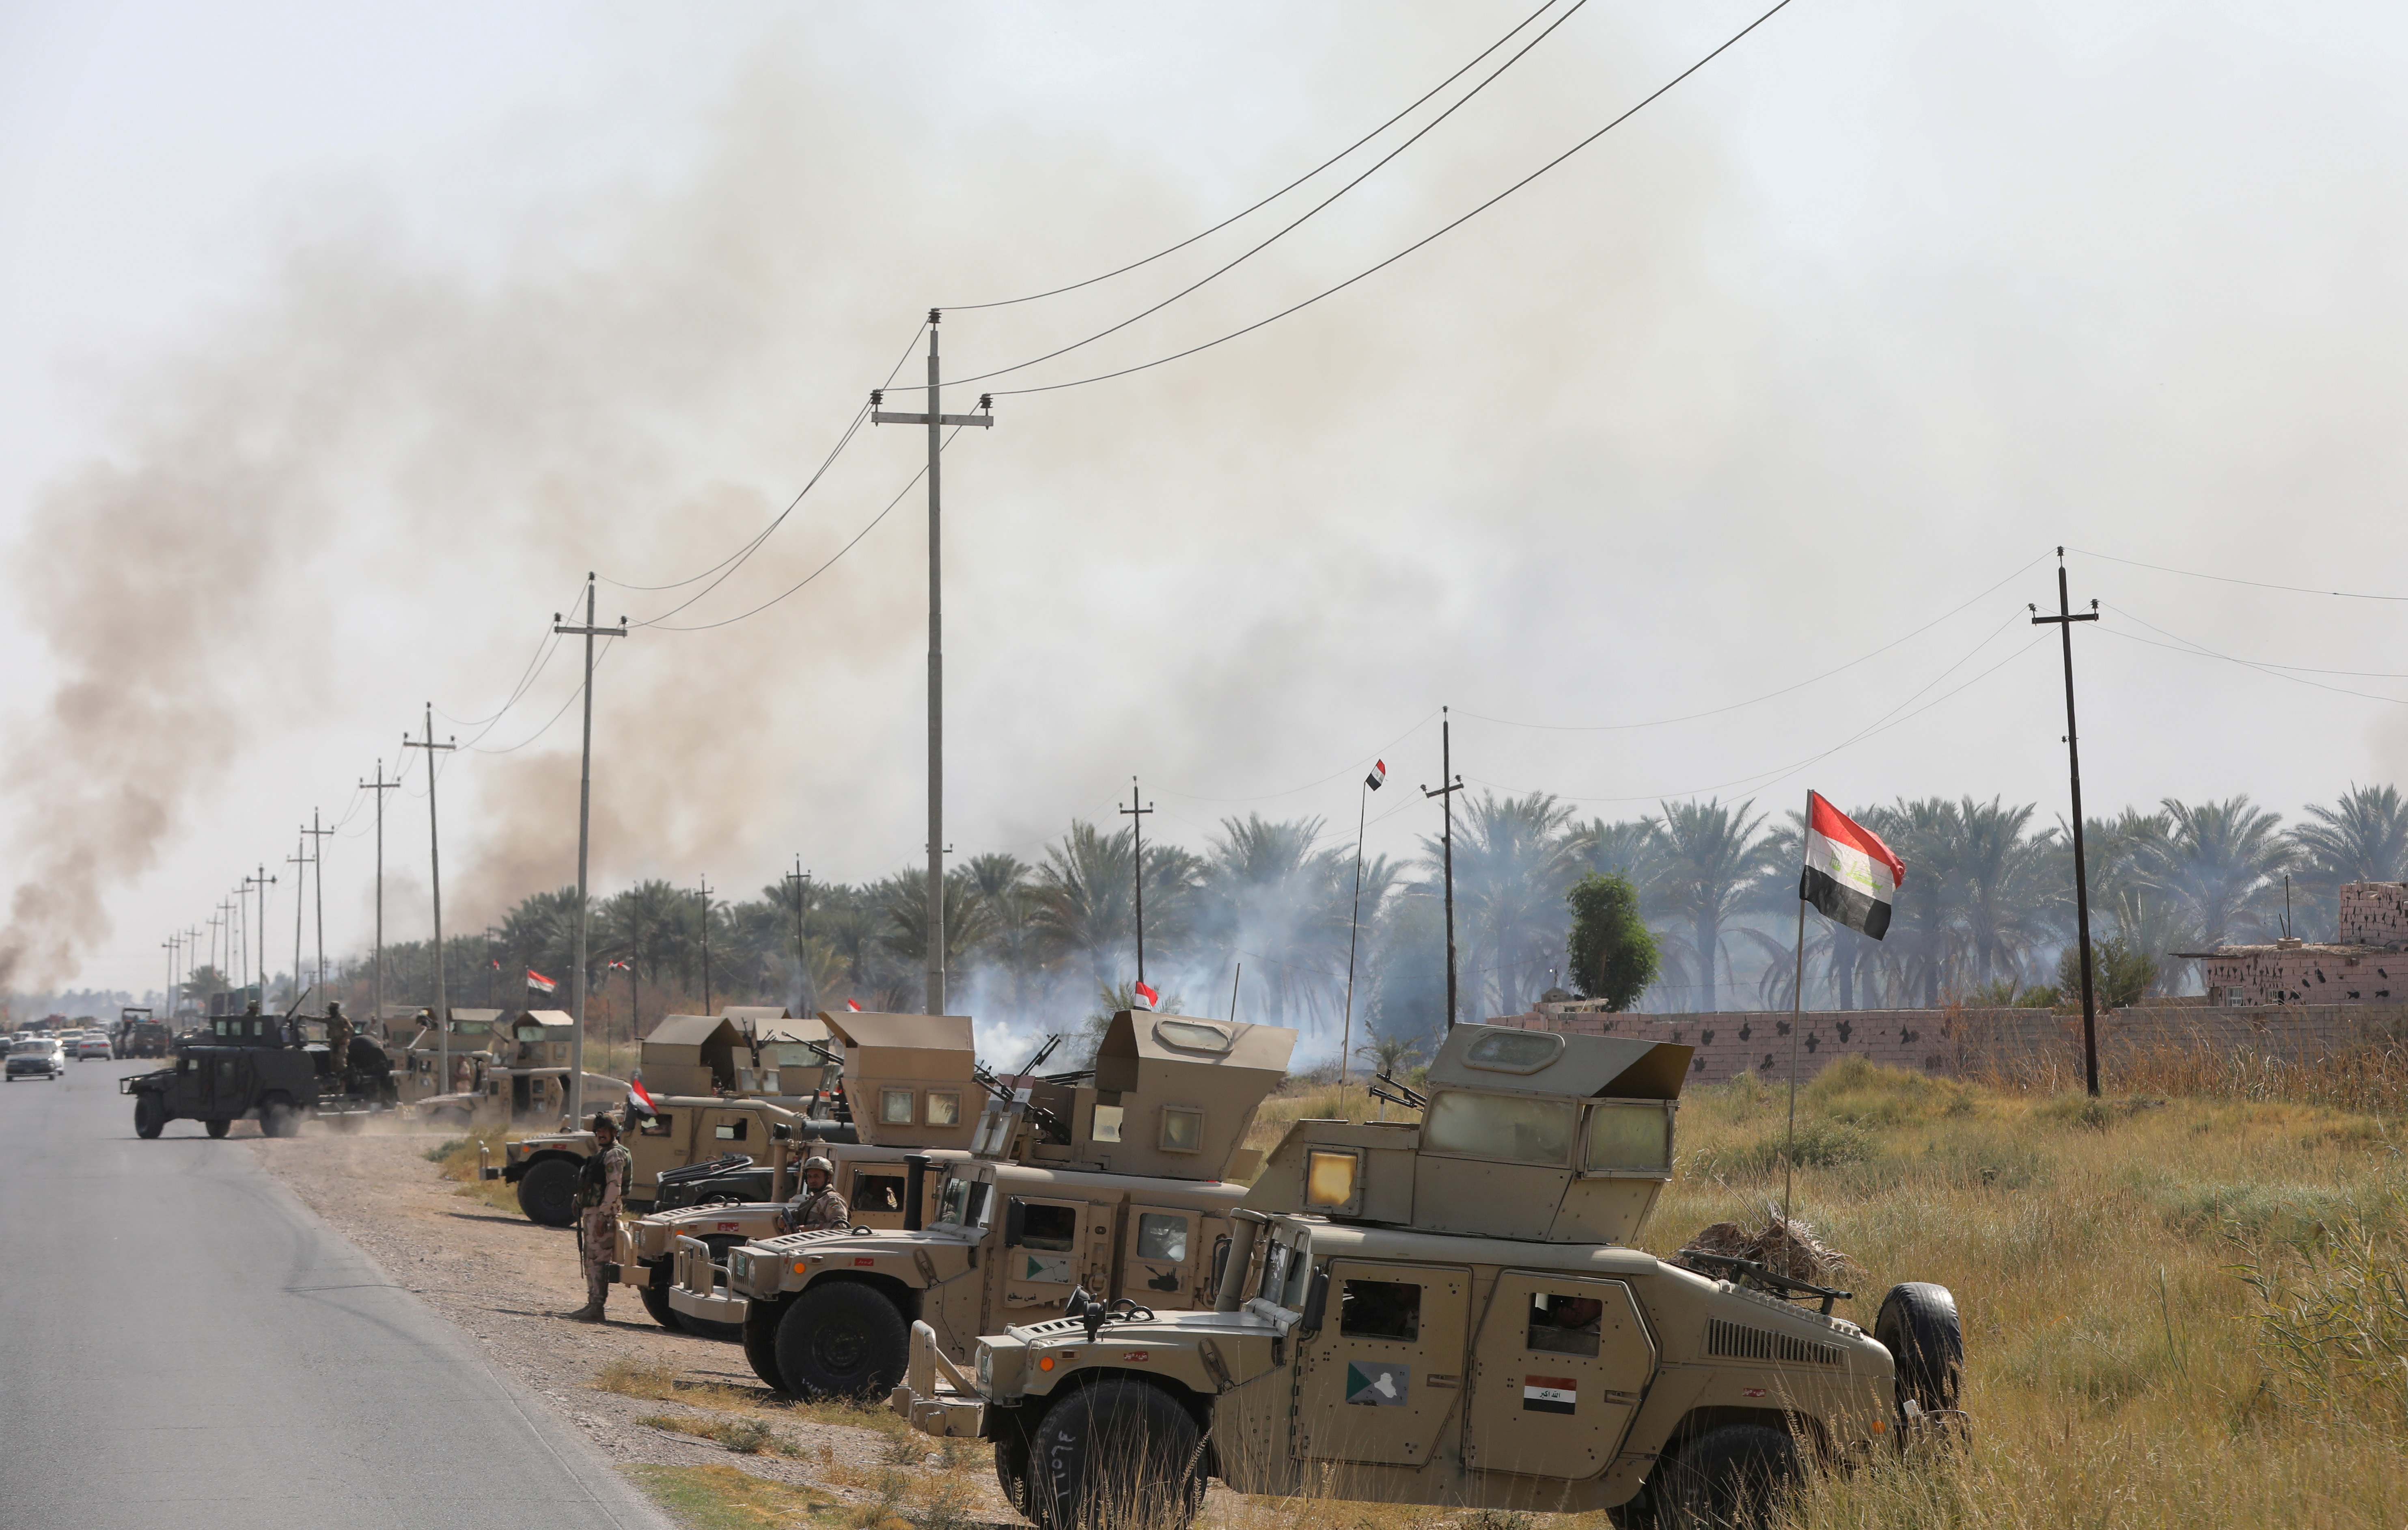 Military vehicles of Iraqi security forces are seen after an attack by Islamic State militants, near Muqdadiya